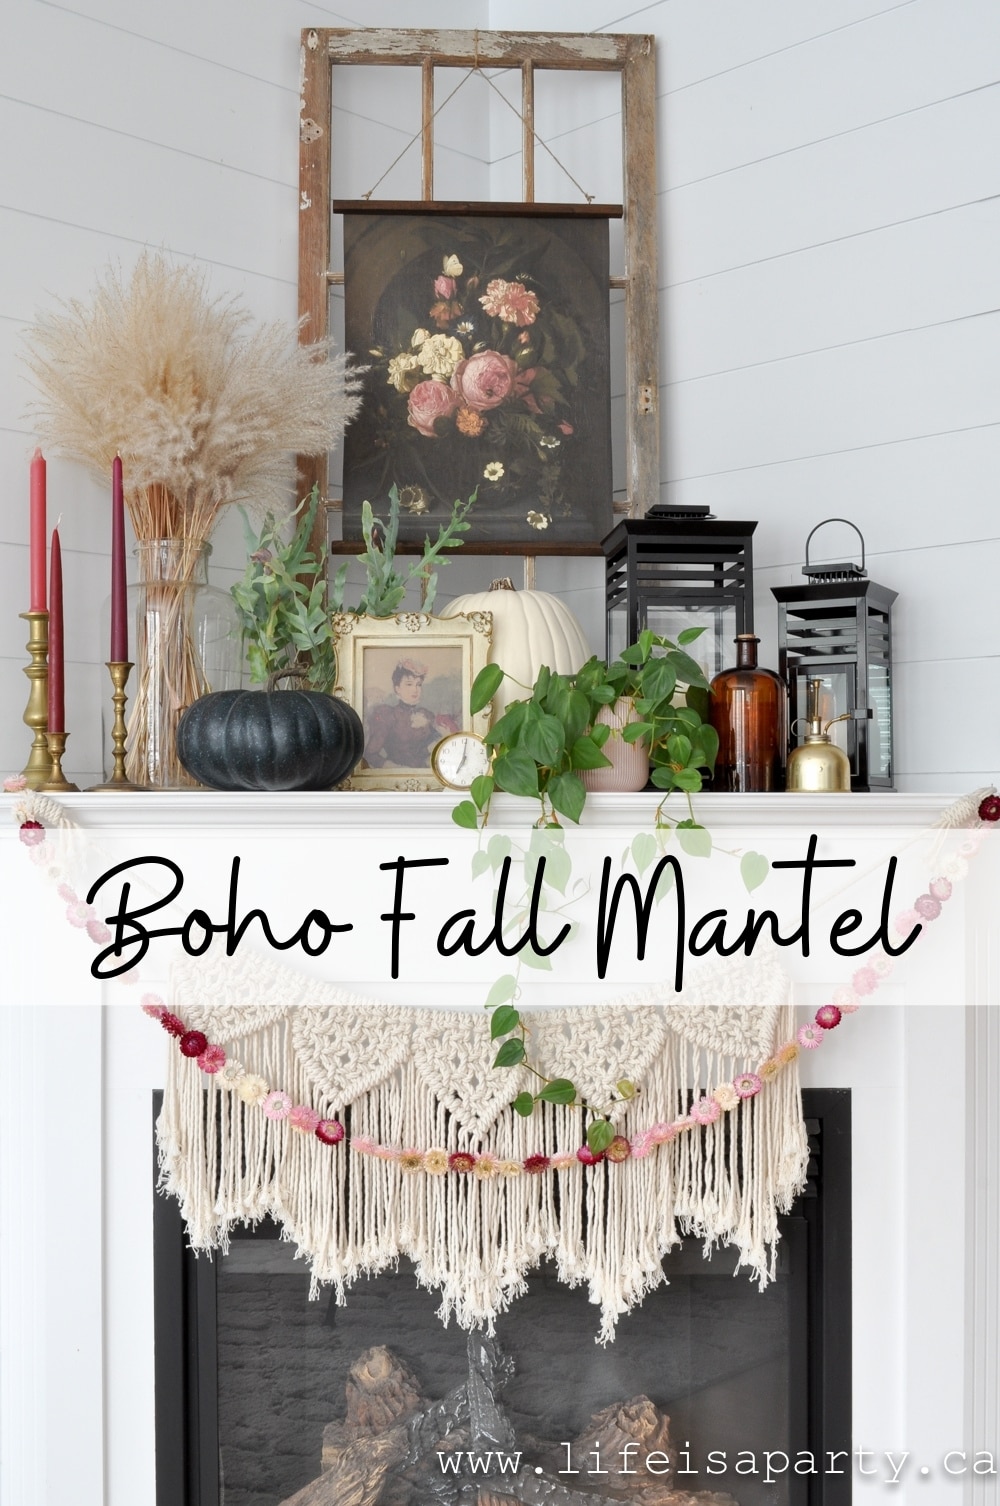 Boho Fall Mantel Decor Ideas: boho styling for fall with dried grasses and flowers, brass candlesticks, house plants, and eclectic art.